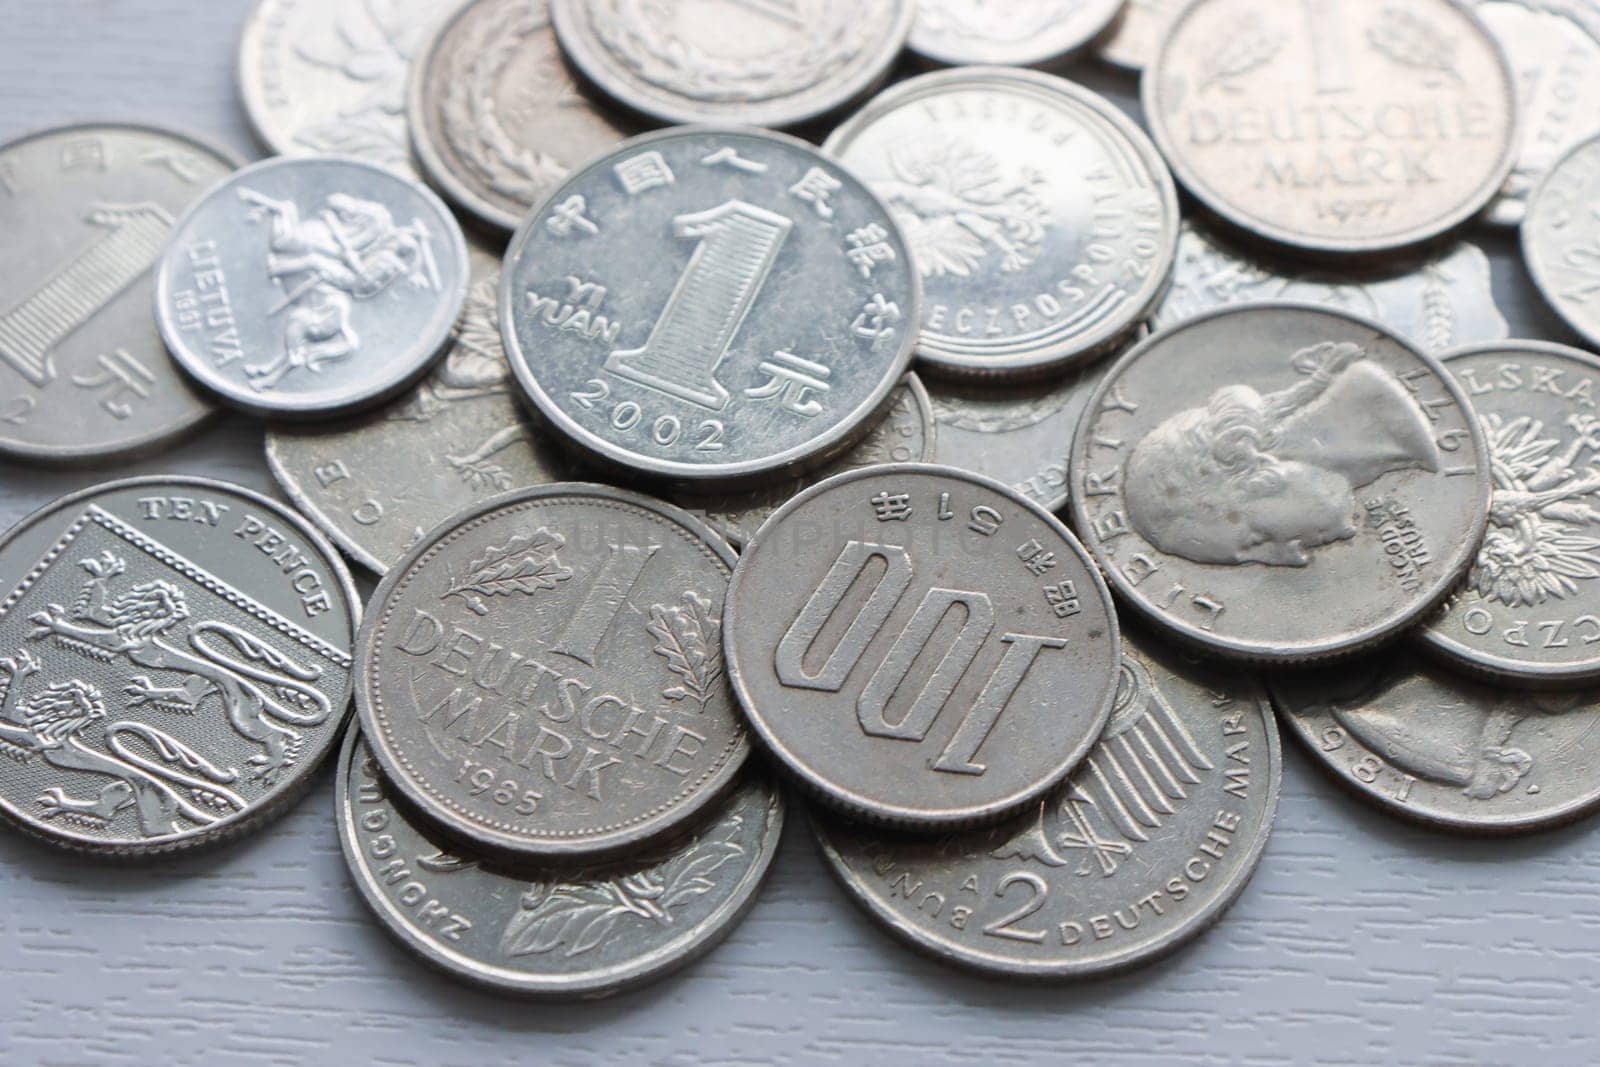 Modern metal coins from different countries, close-up. by gelog67